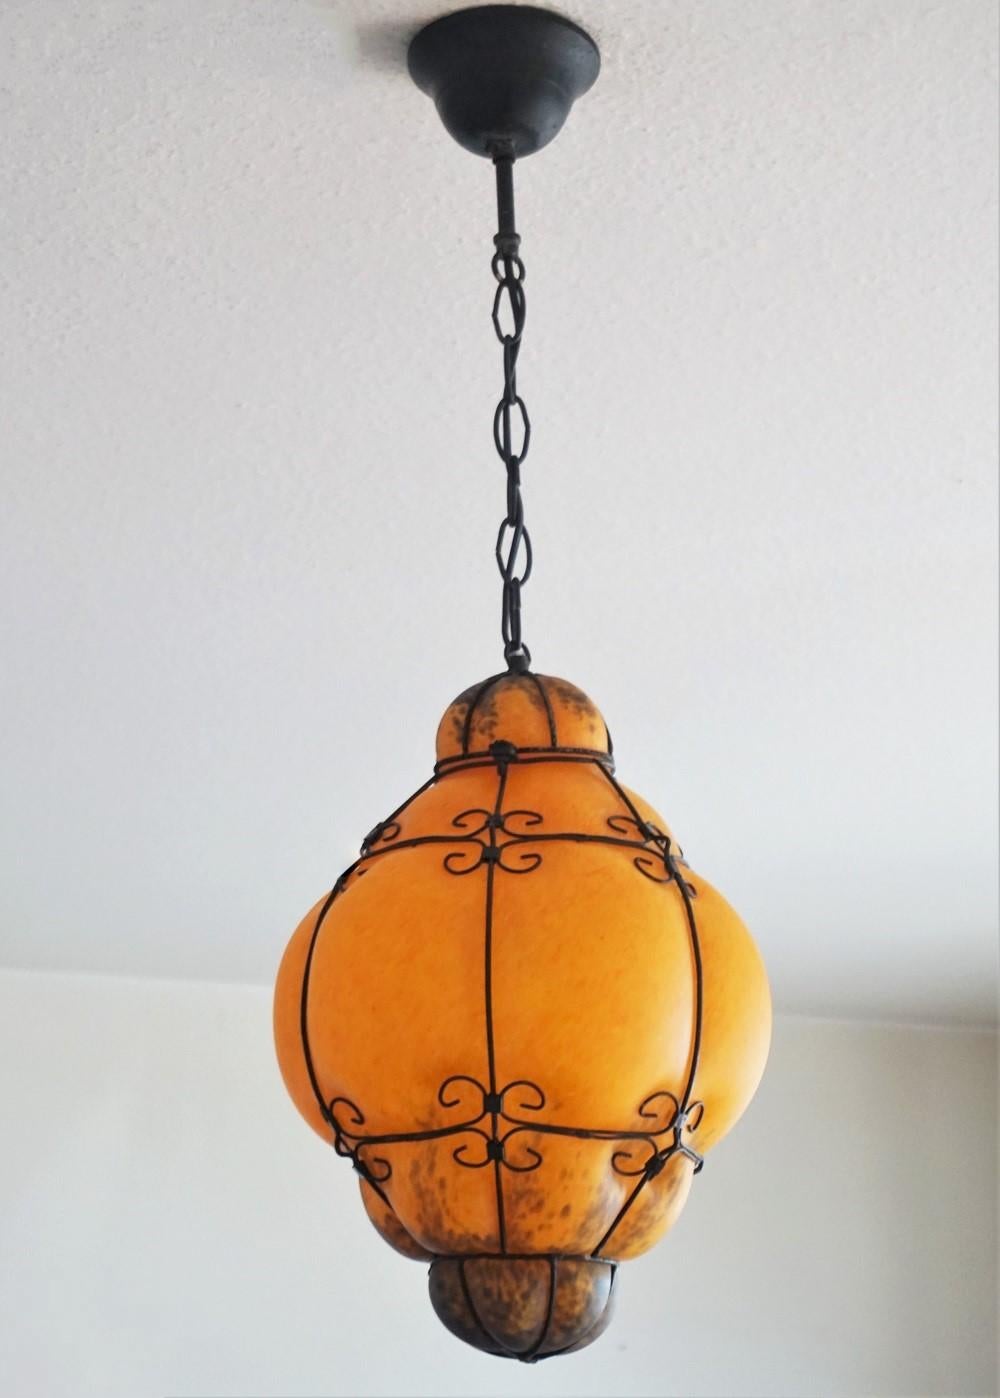 Murano hand blown colored glass in wrought iron frame pendant, orange, yellow and green colors with great lighting effect, Venice, Italy, 1930s. This pendant is for indoor and outdoor use.
One E27 light socket for a large sized bulb up to